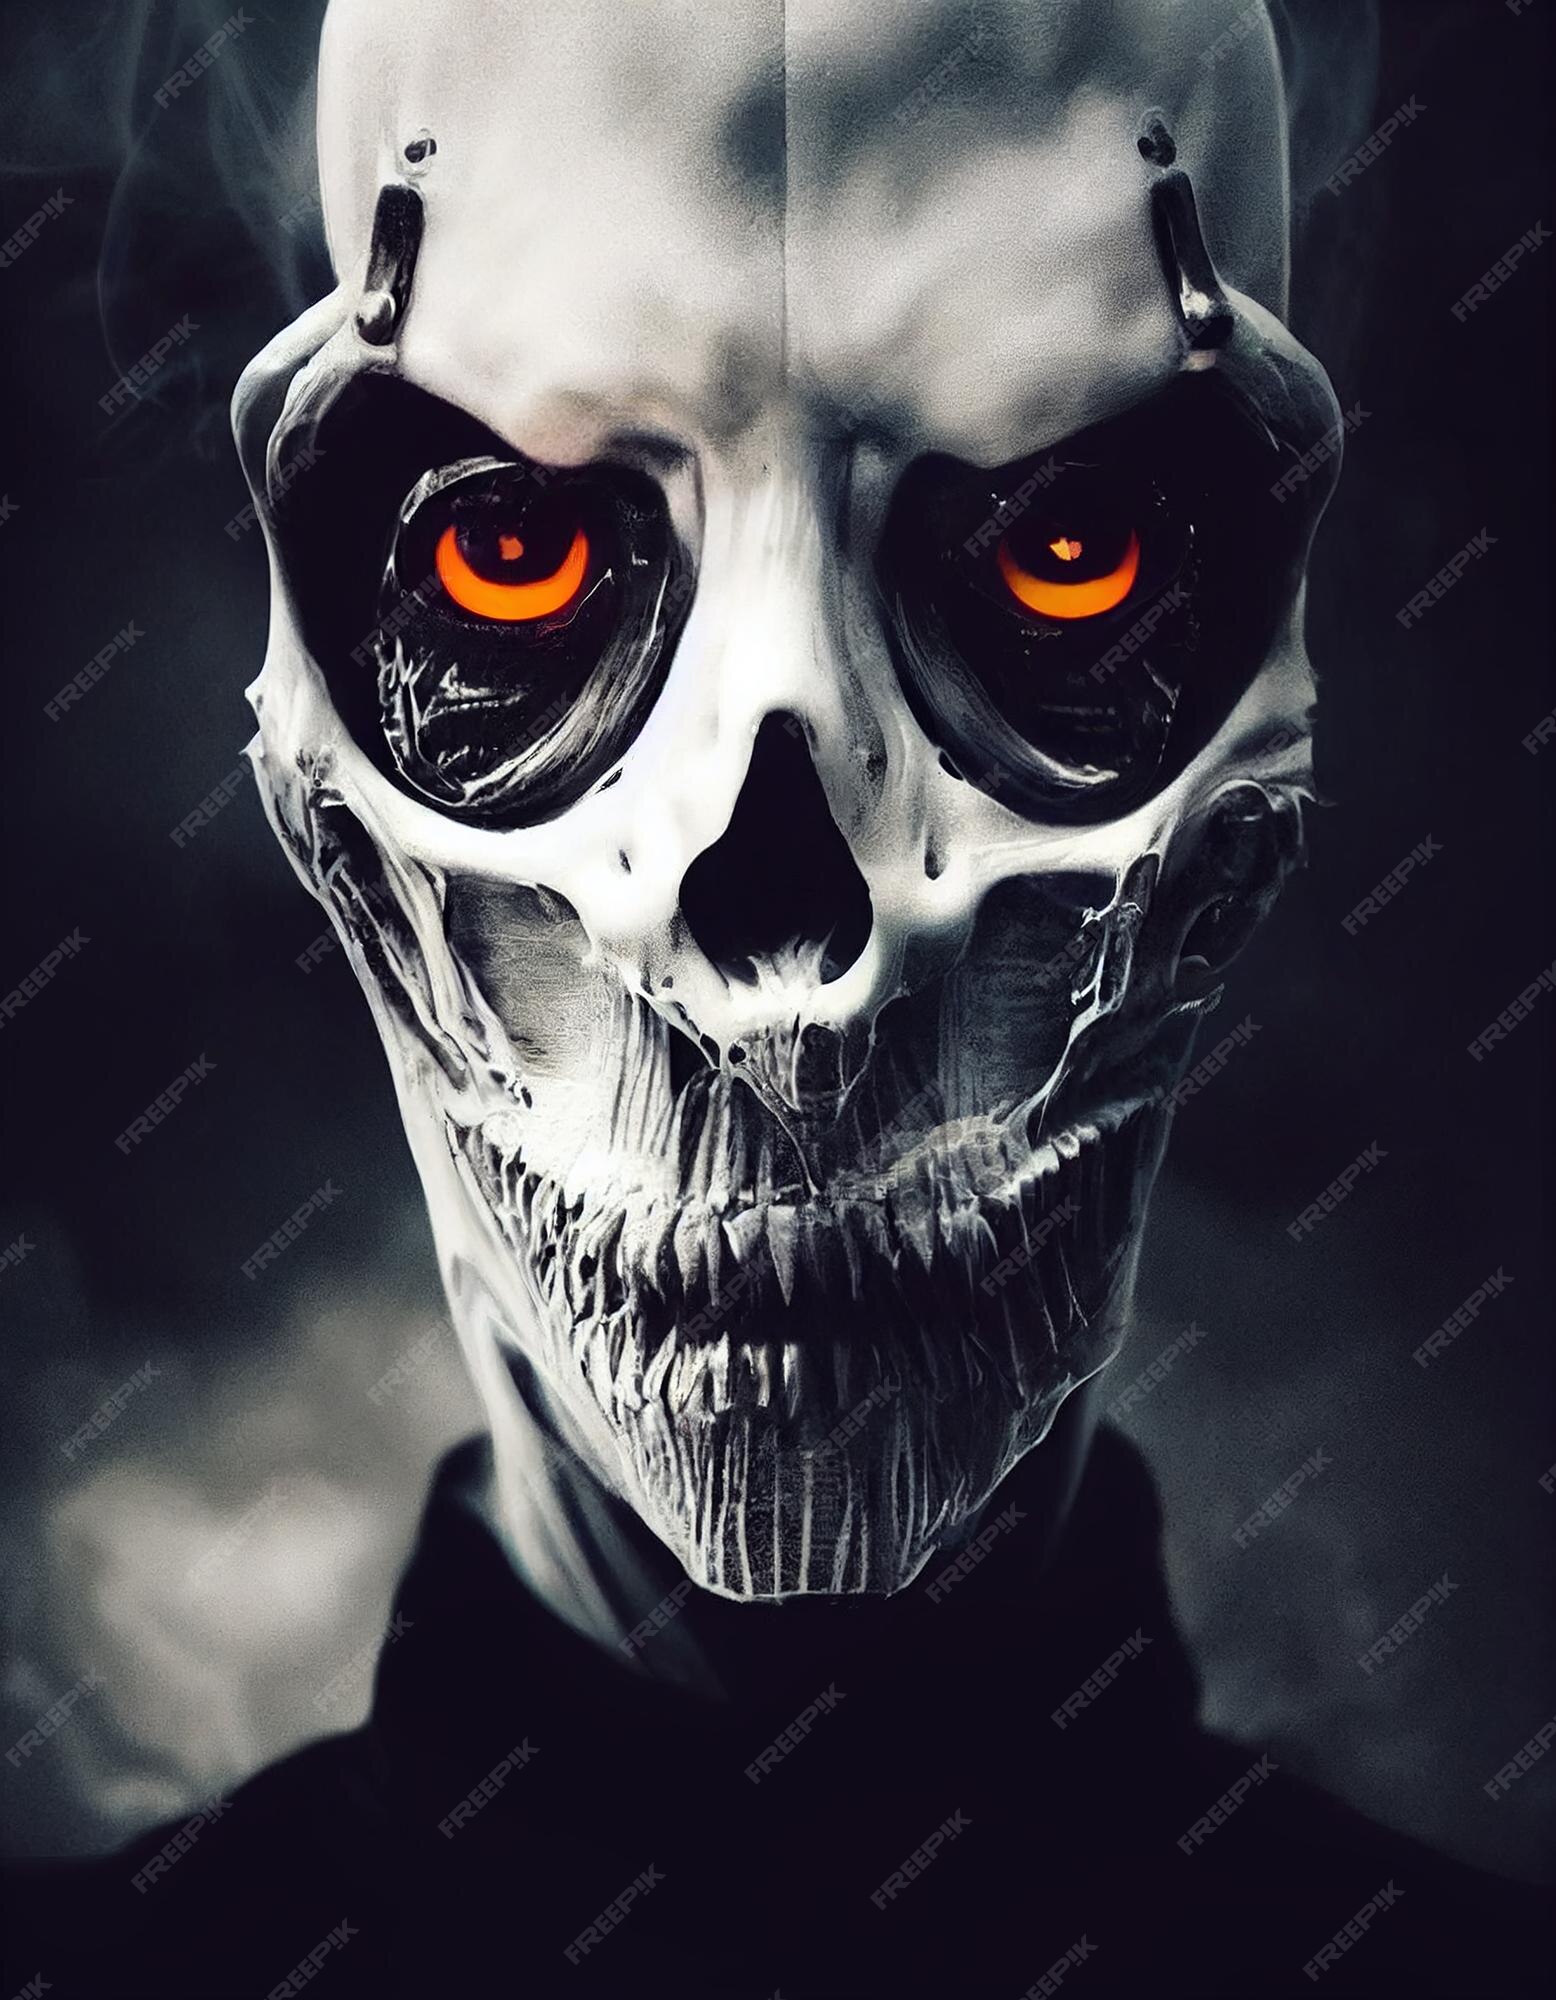 Page 22 | Book scary Images | Free Vectors, Stock Photos & PSD